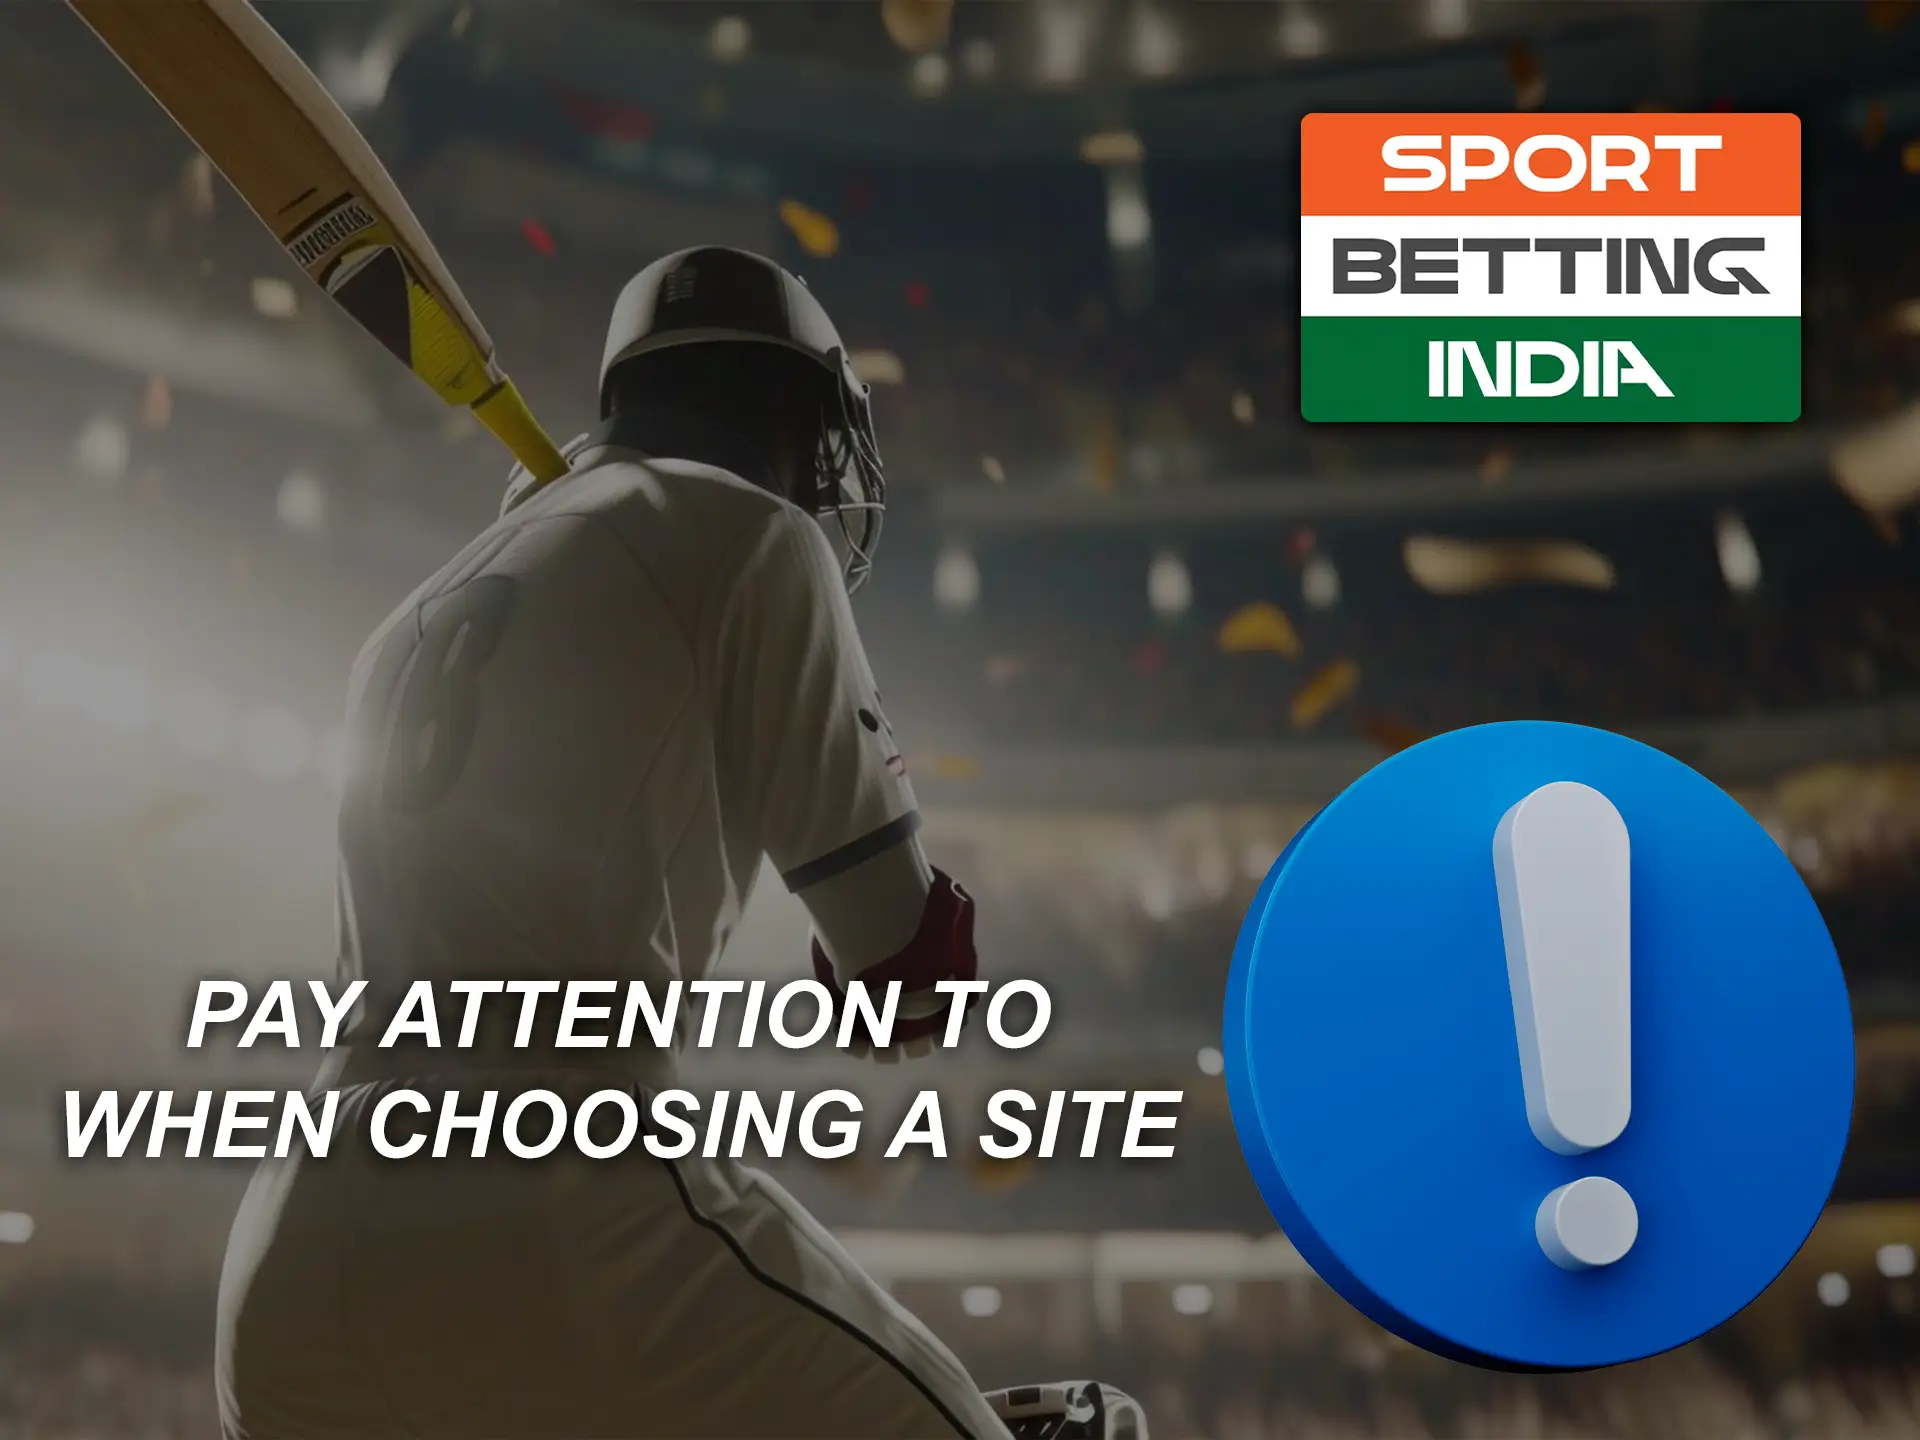 Pay your attention to the points of the SportBetting article, following which you will be able to choose the best betting site for you.